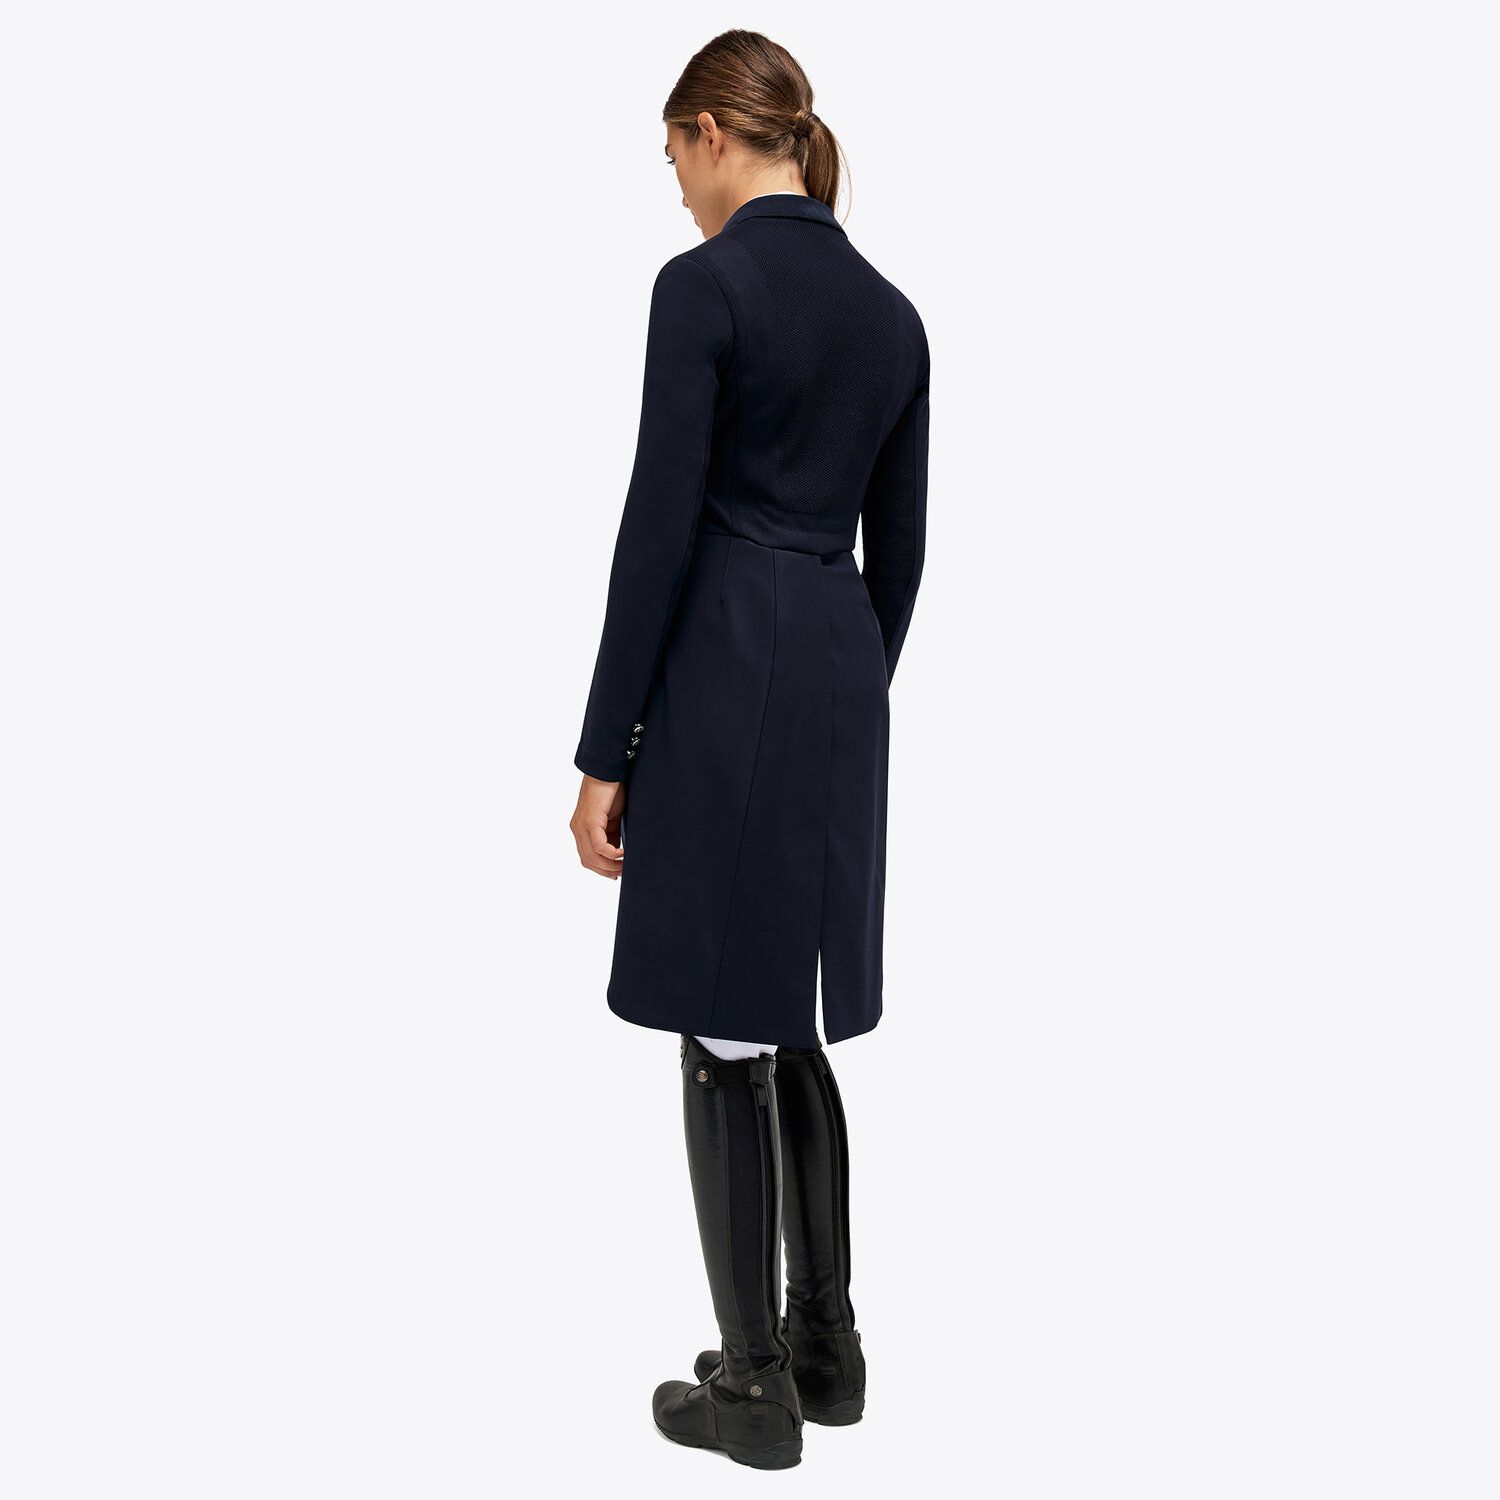 Cavalleria Toscana Women's tailcoat with covered b NAVY-3